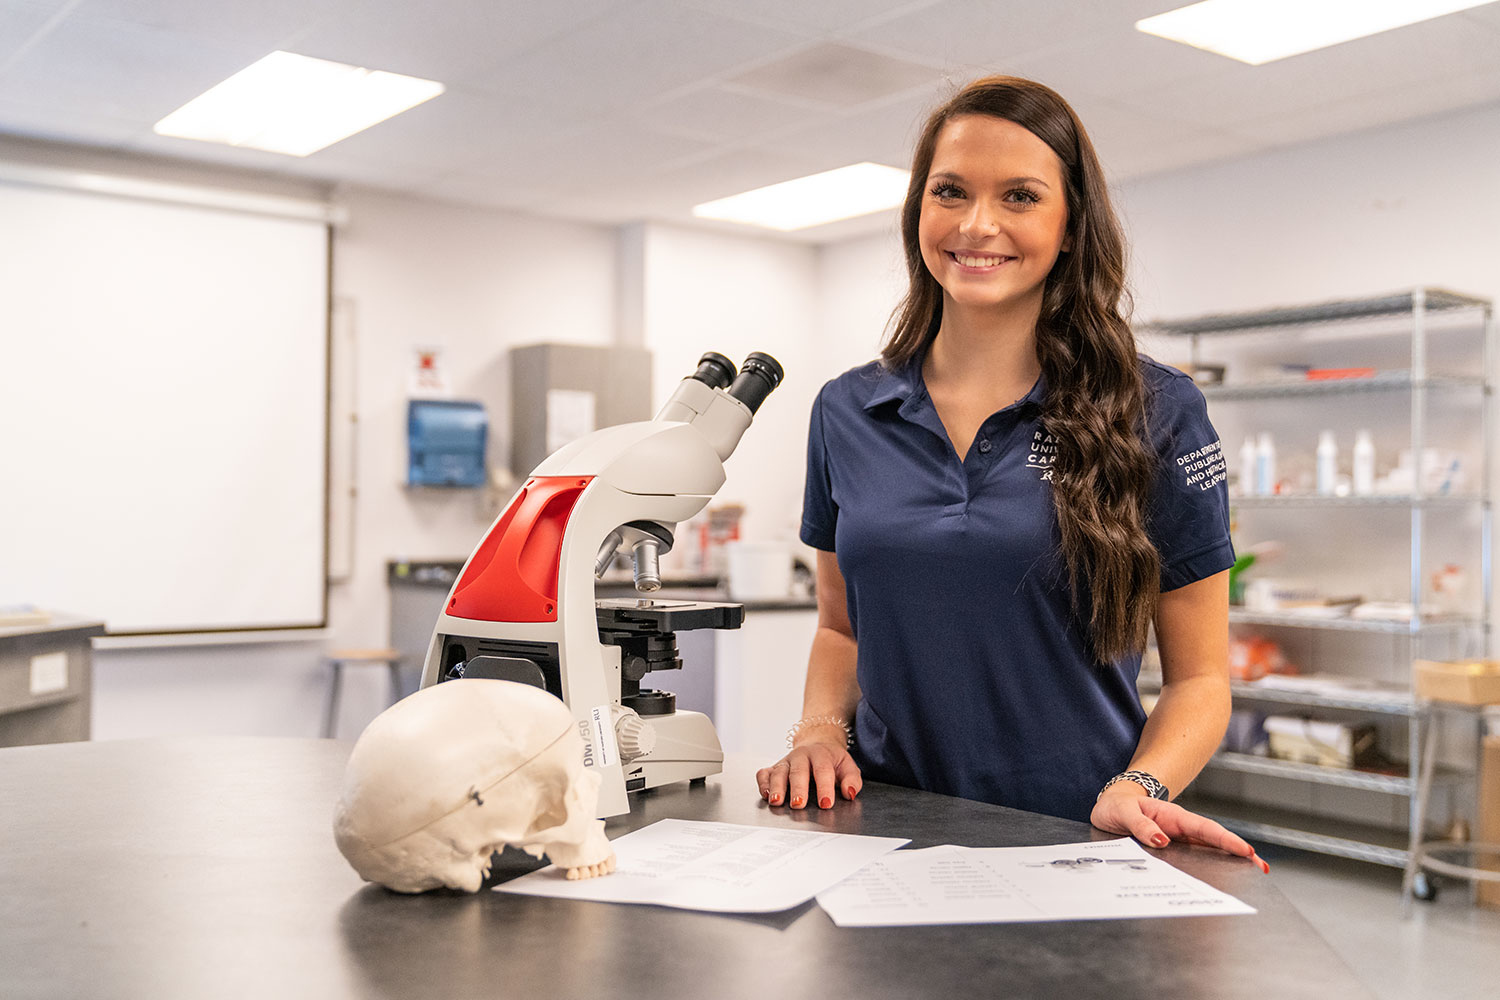 girl standing next to a desk with a microscope and fake skull on it